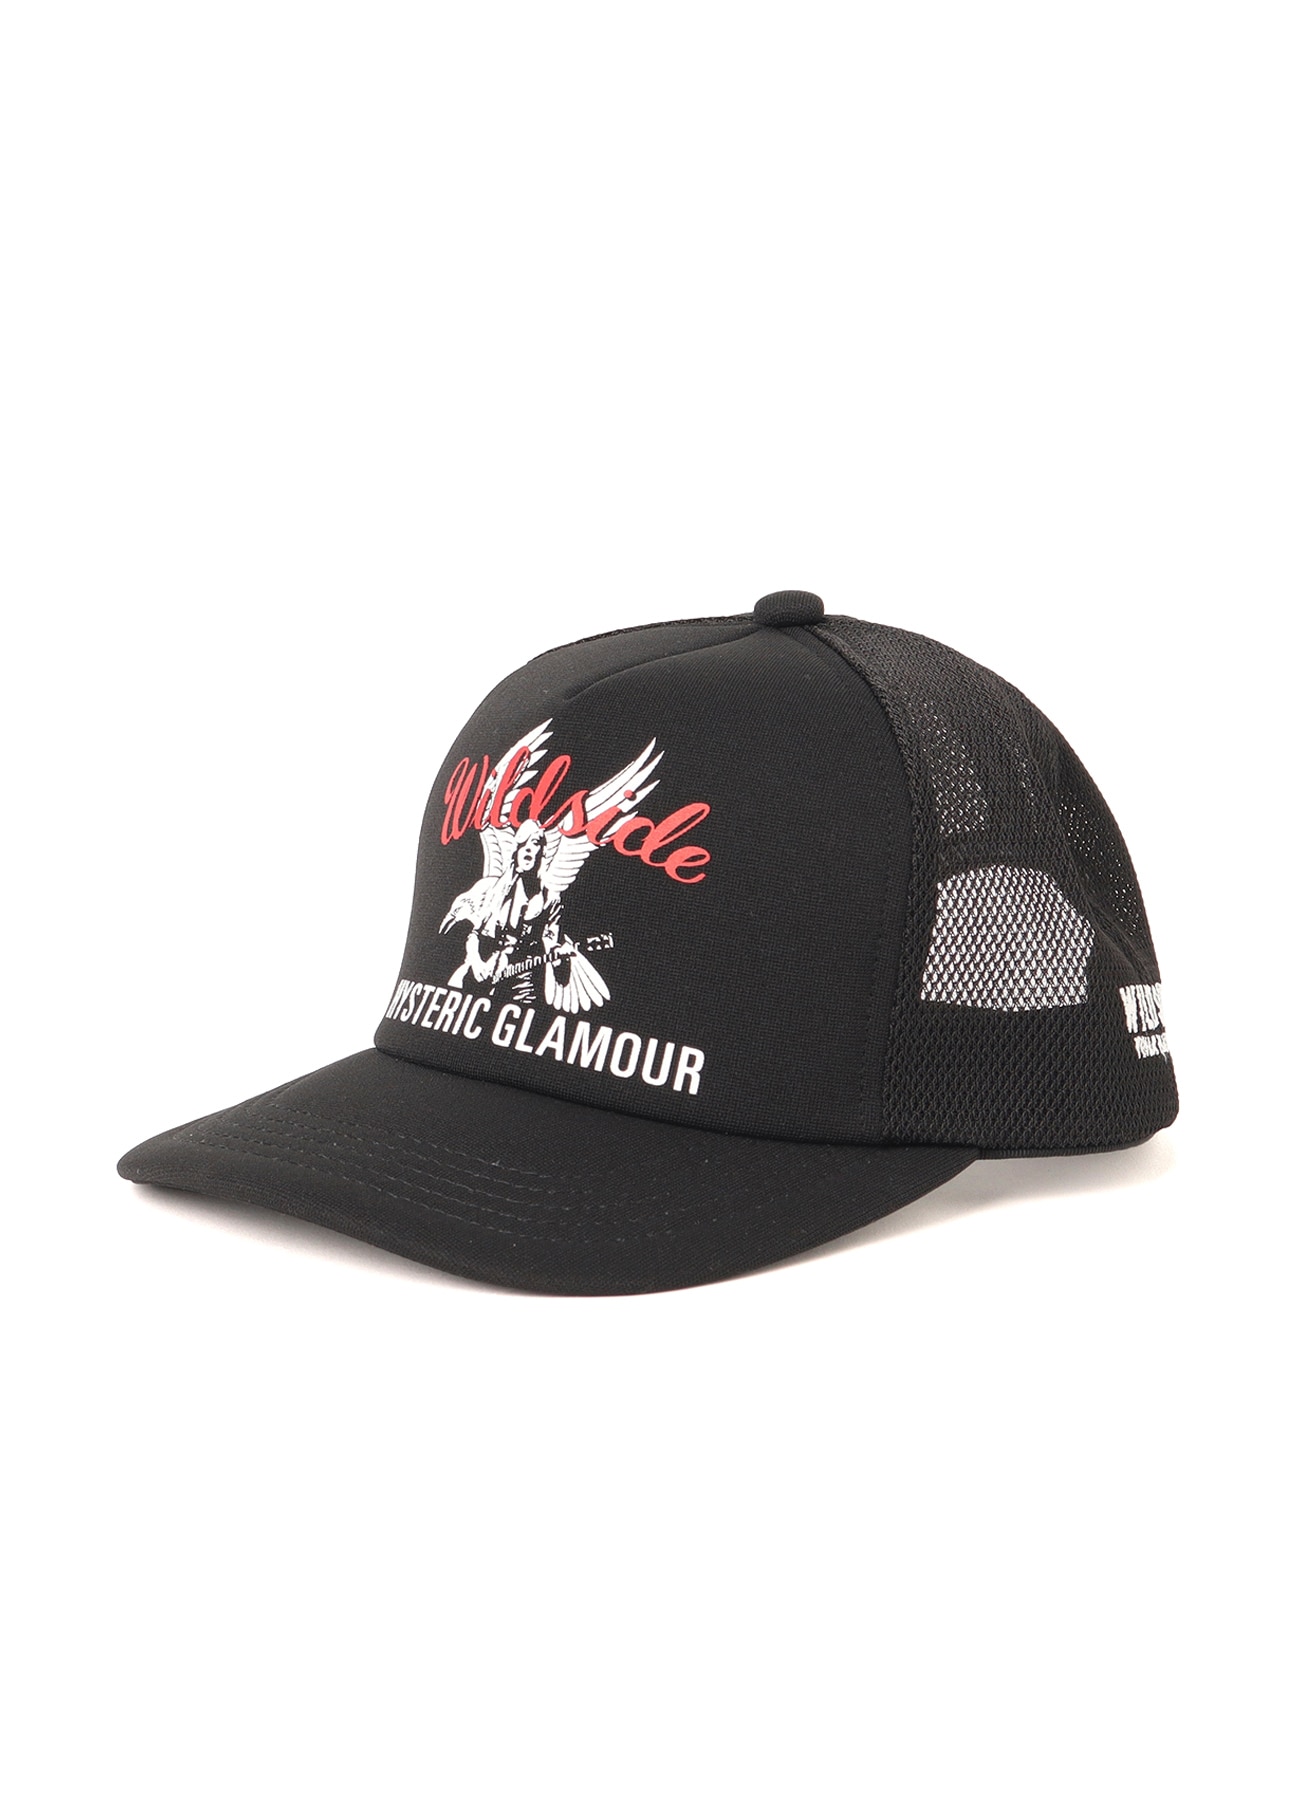 【4/20 12:00(JST) Release】WILDSIDE × HYSTERIC GLAMOUR MESH CAP